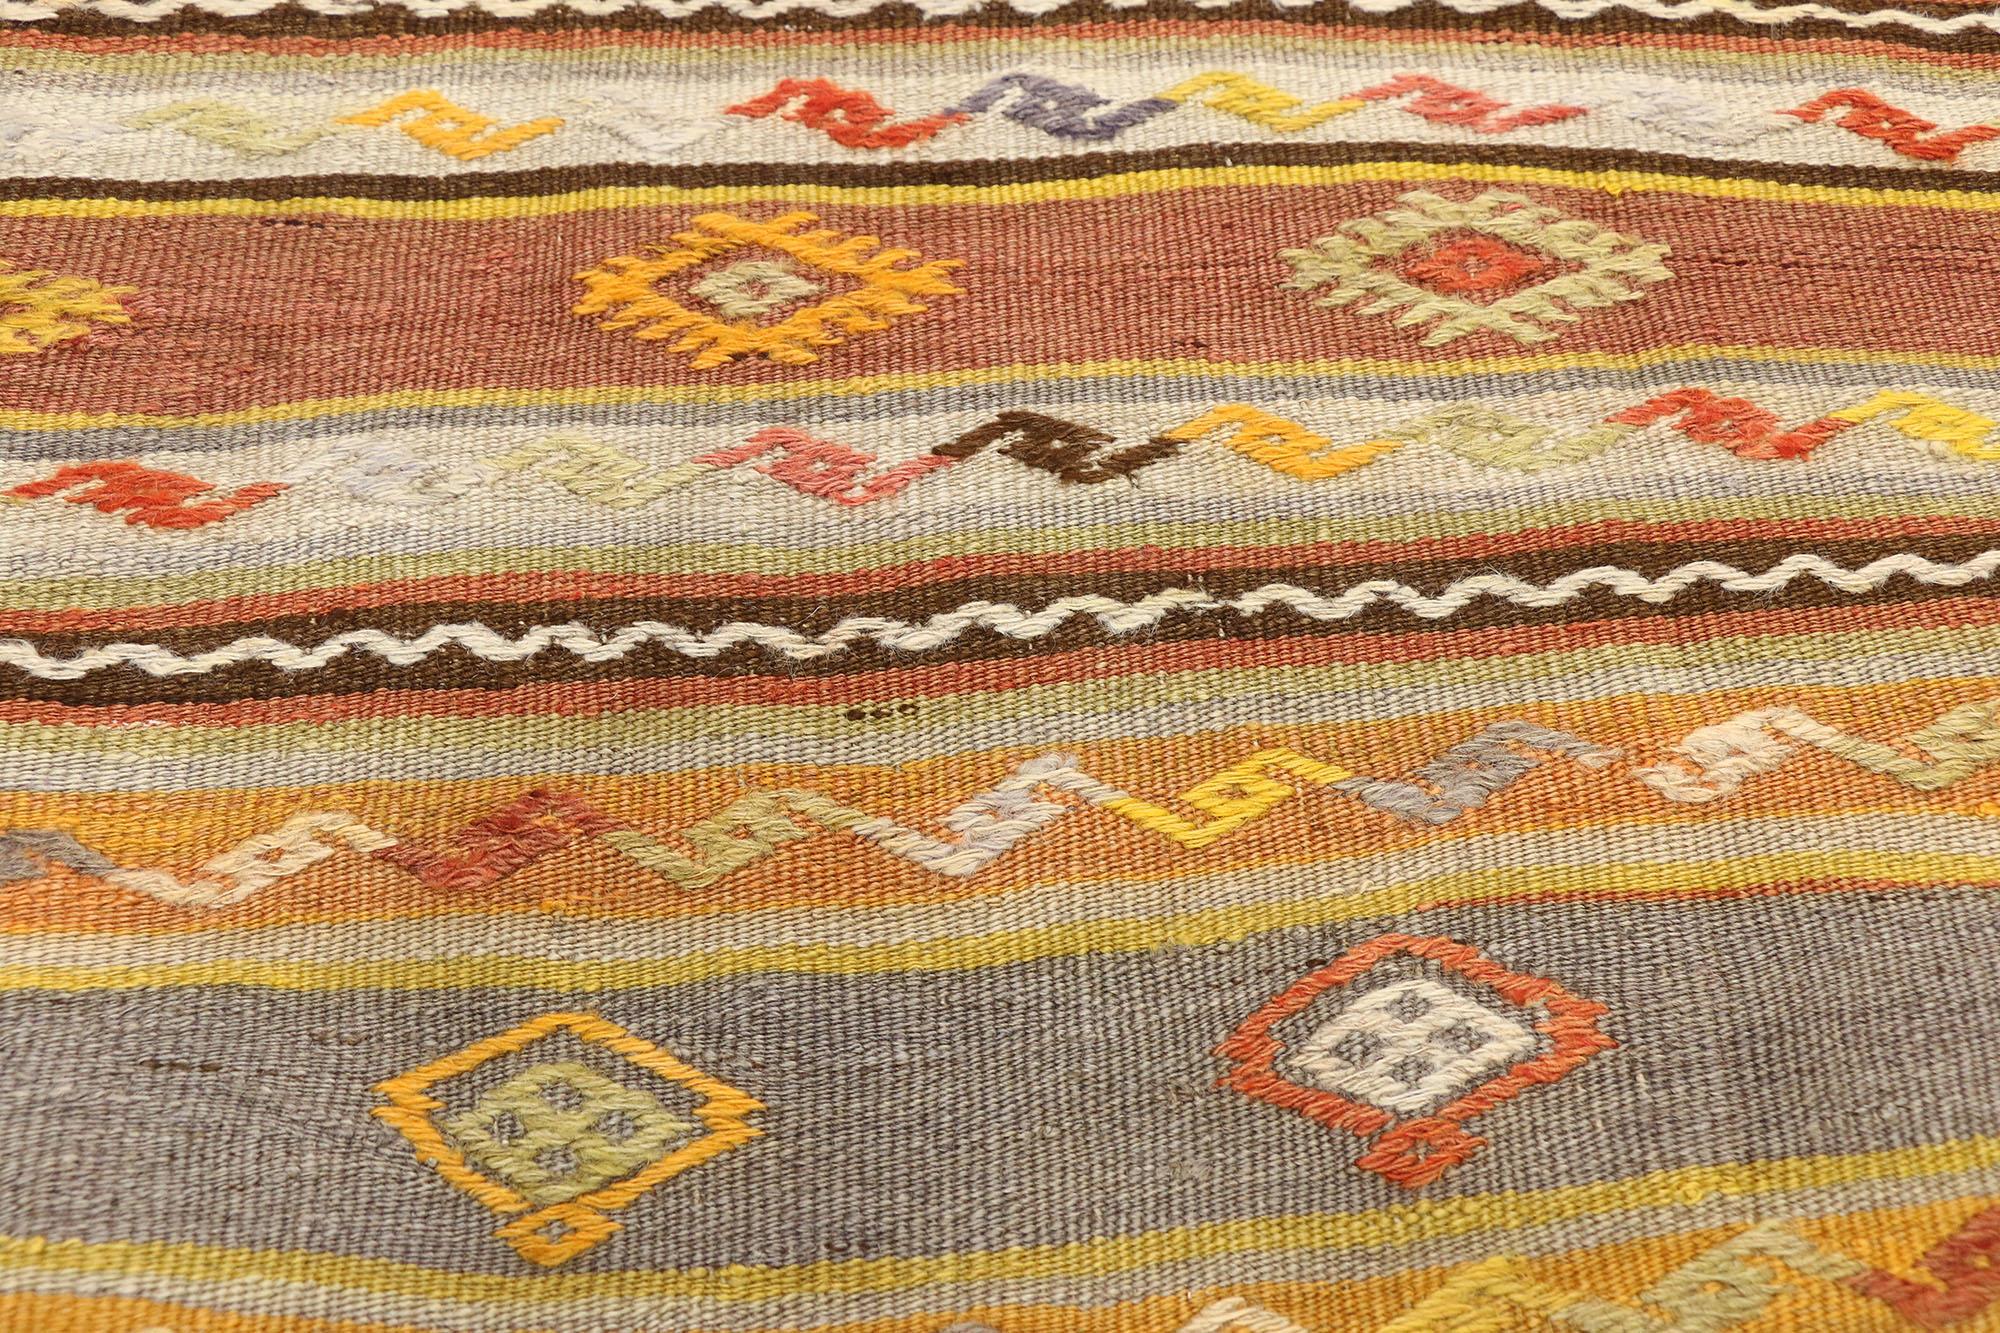 Vintage Turkish Striped Kilim Rug with Modern Boho Chic Tribal Style In Good Condition For Sale In Dallas, TX